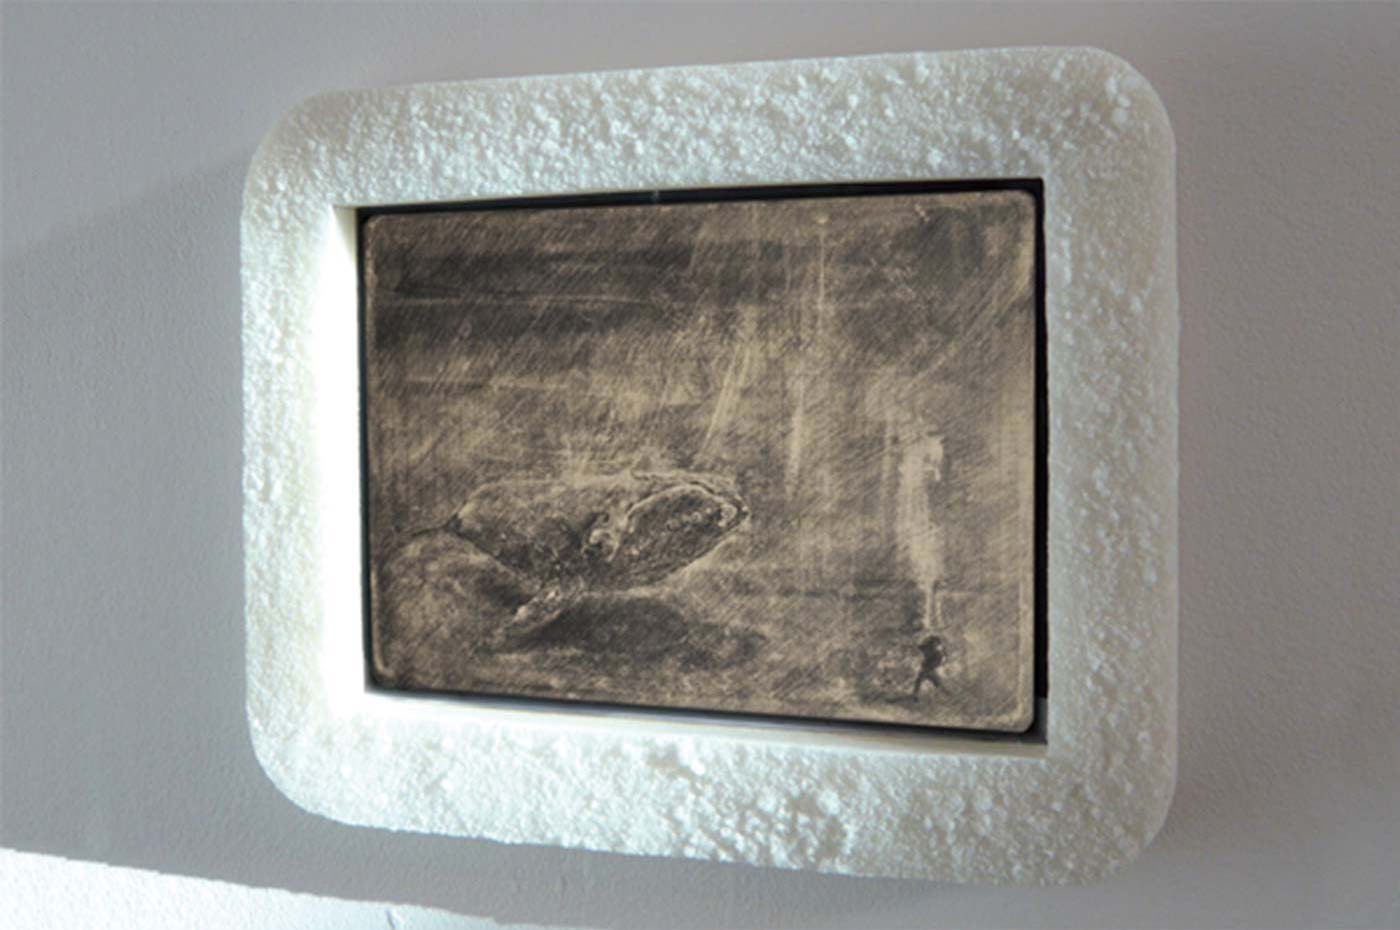 electricity, slide projector, mirrors, drawing on acetate, chemical compounds, frame in sea salt. 2011